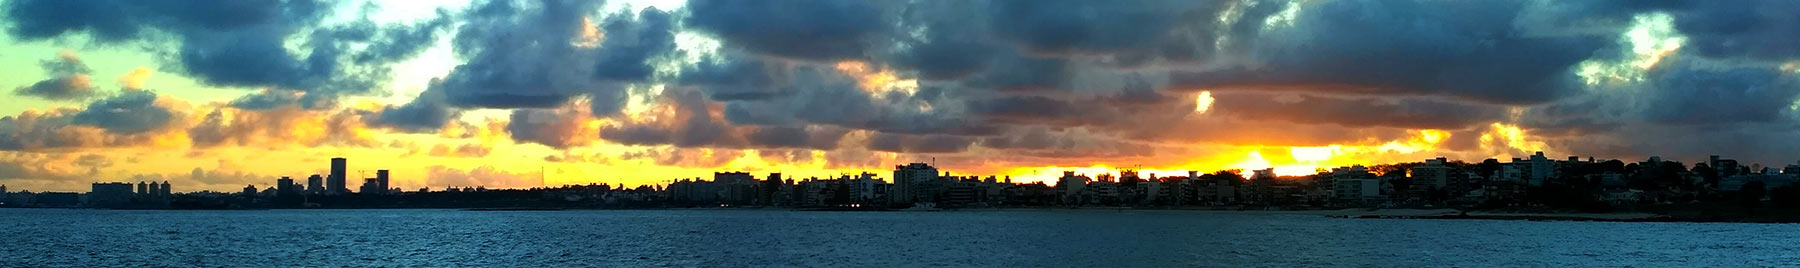 Sunset over Montevideo and bay